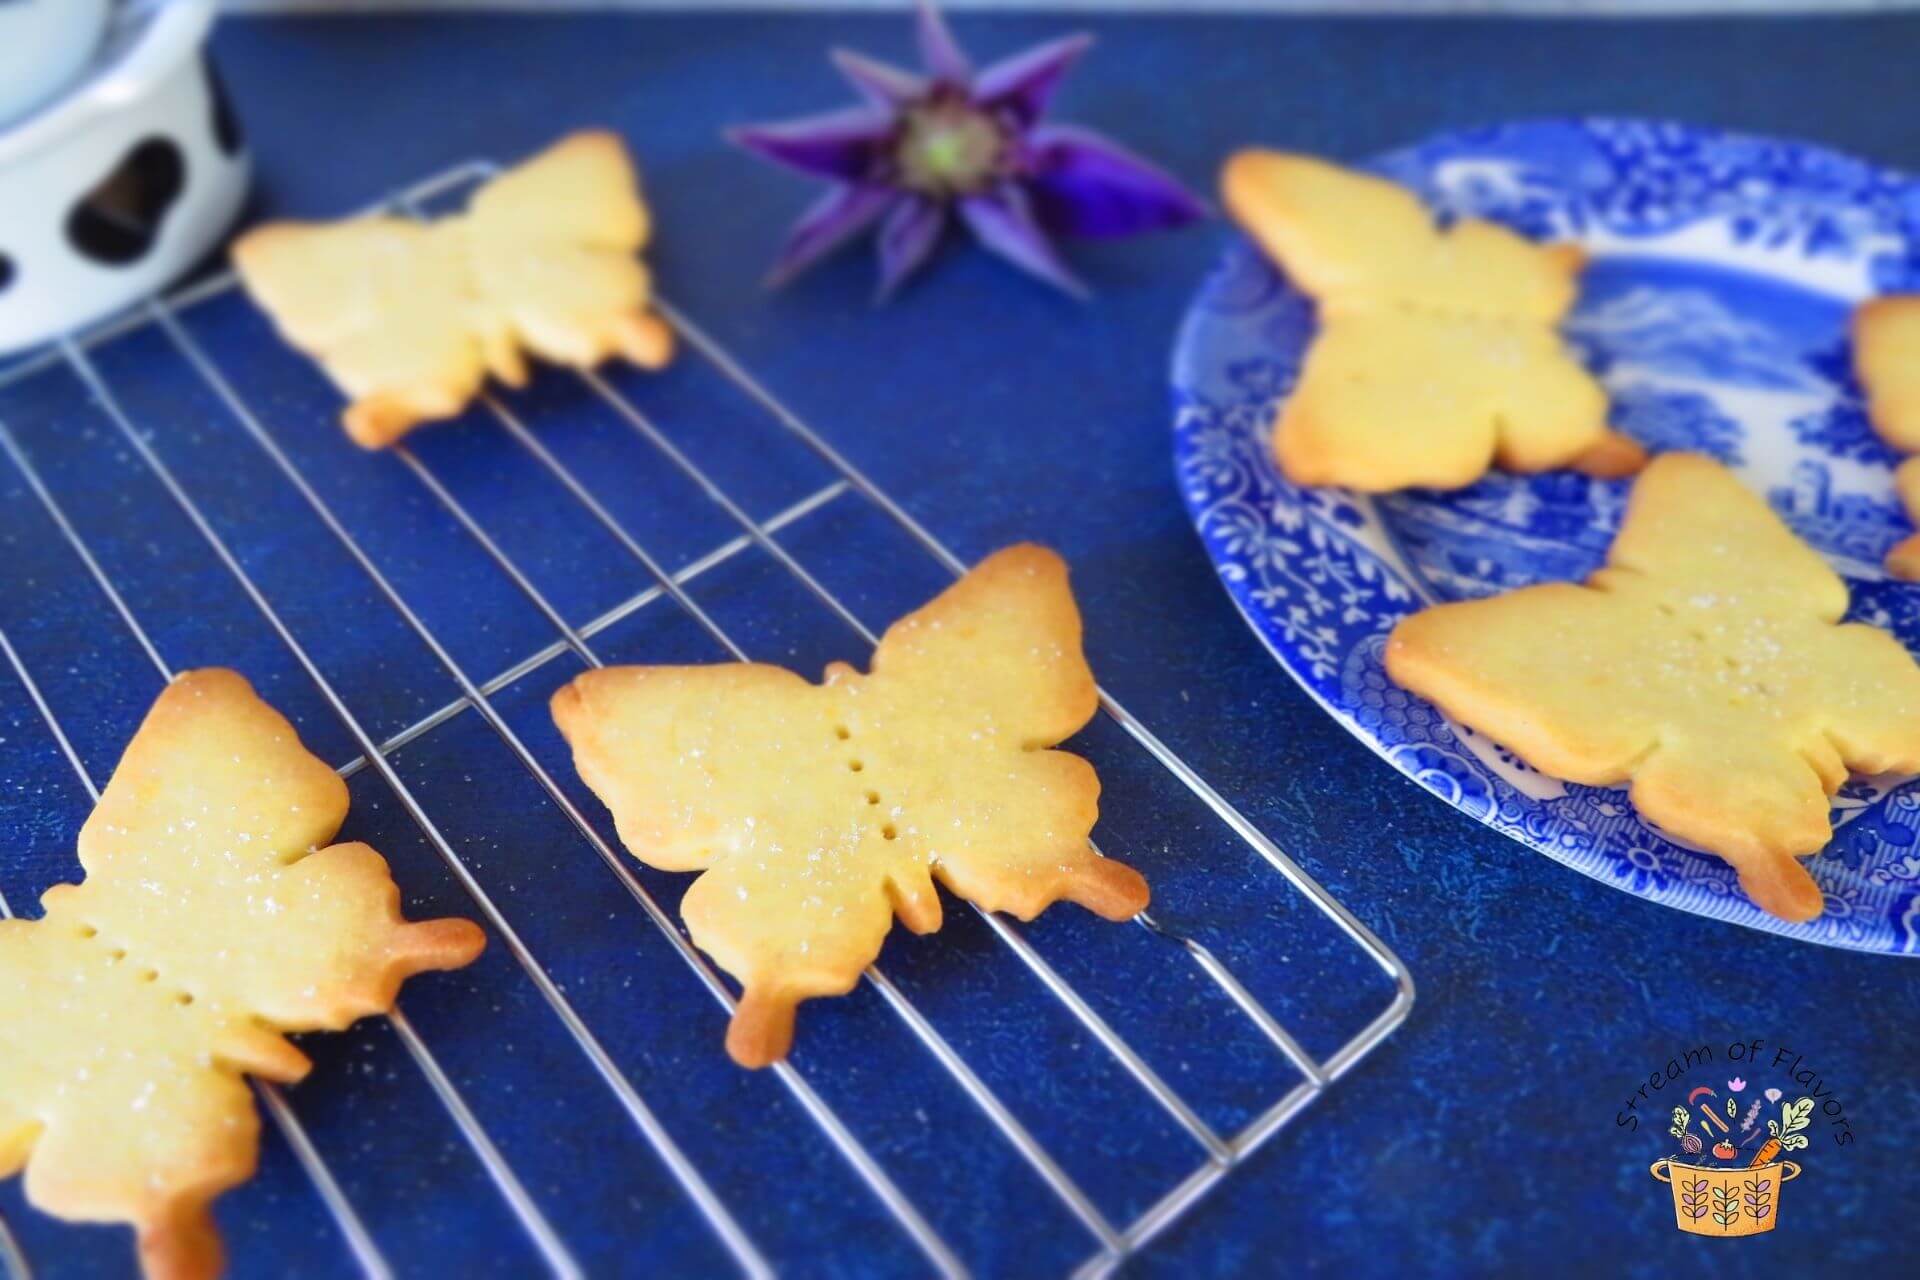 Butterfly-shaped Shortbread cookies placed on a wire rack and blue plate on a blue base